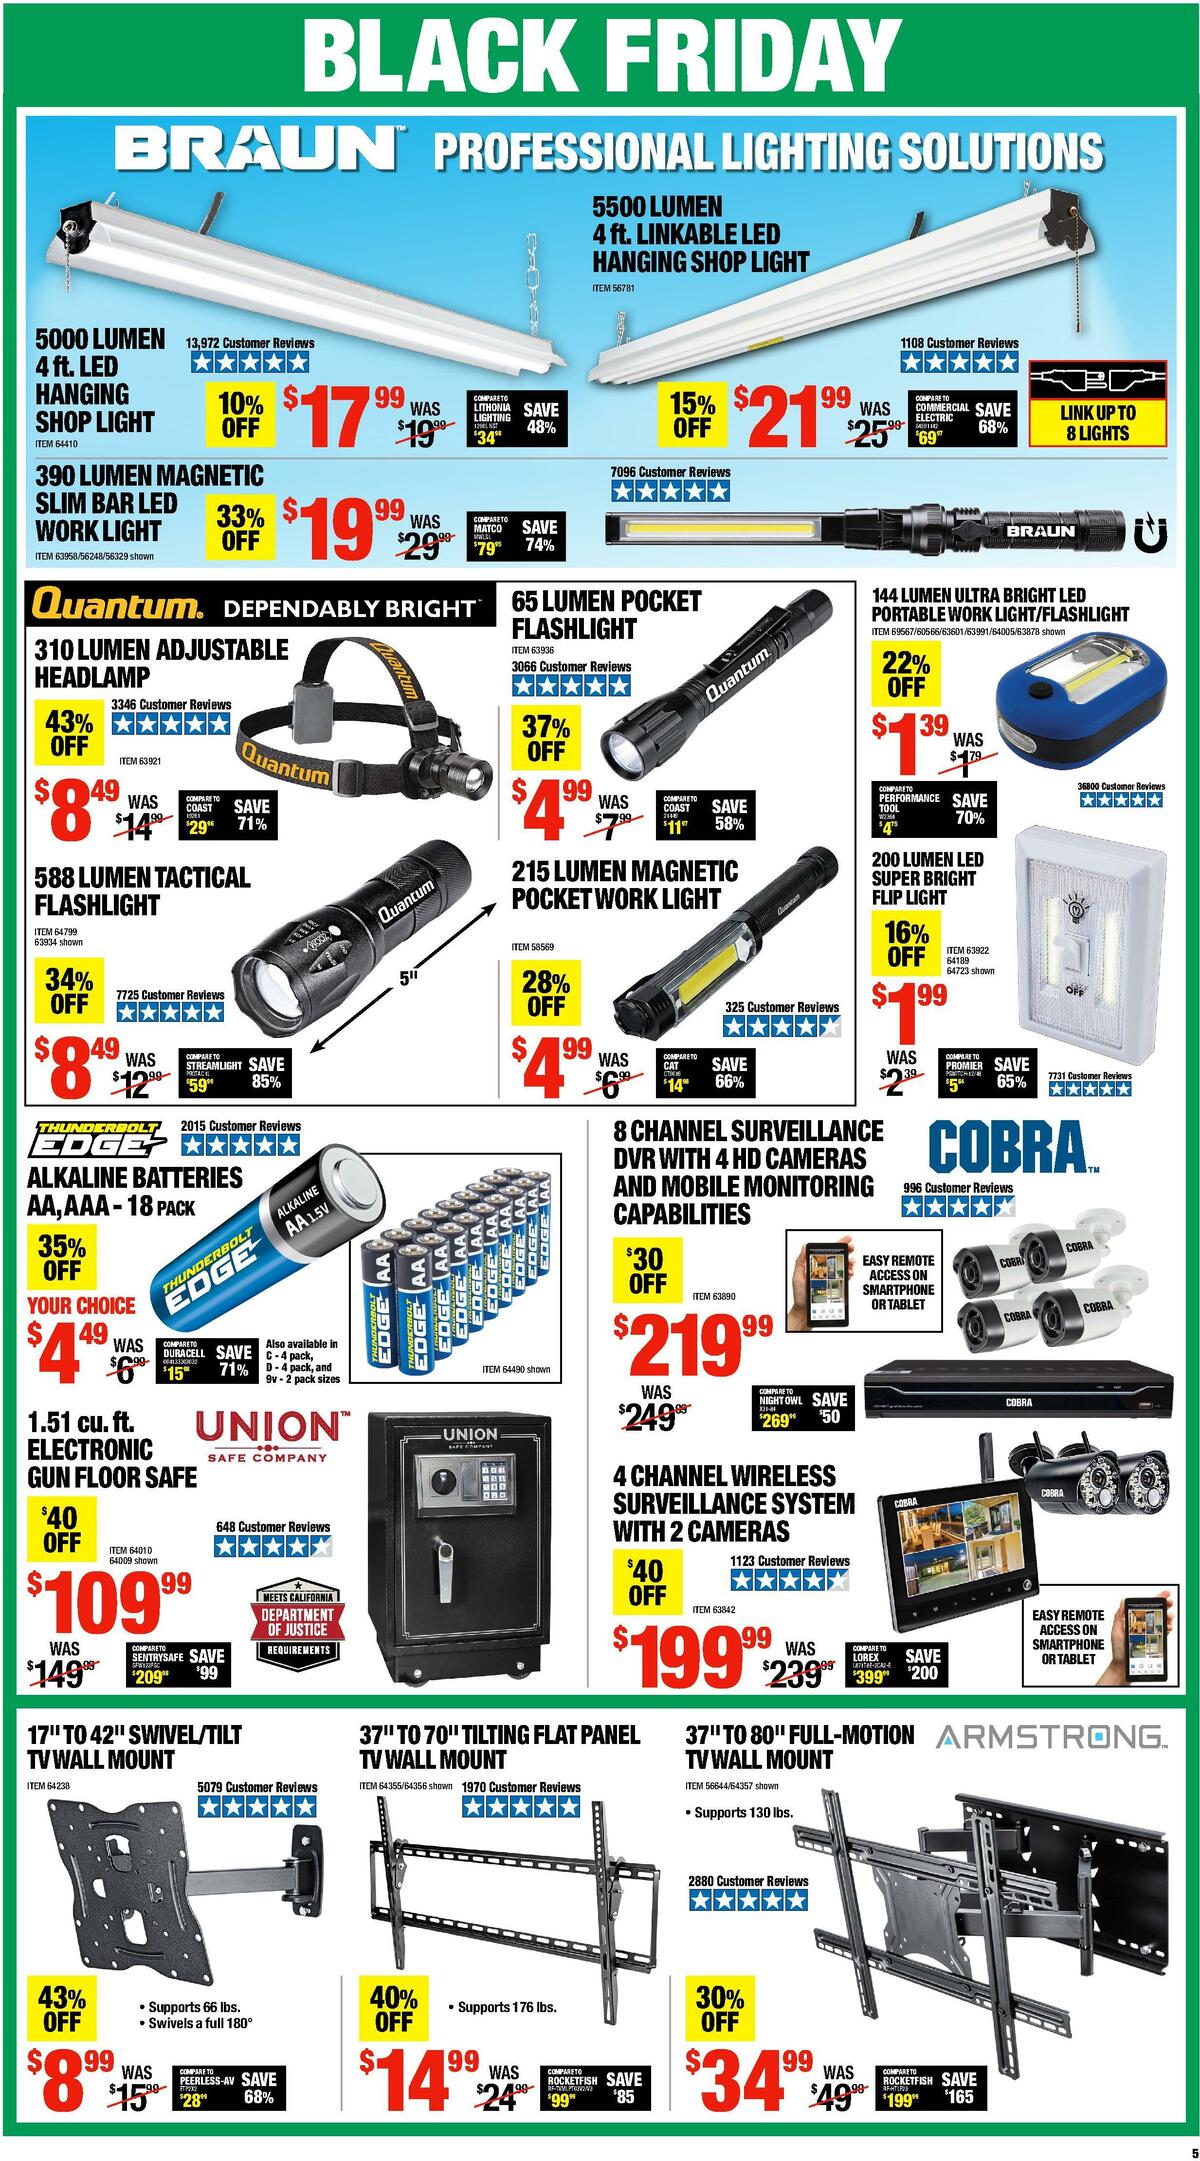 Harbor Freight Tools Weekly Ad from November 22